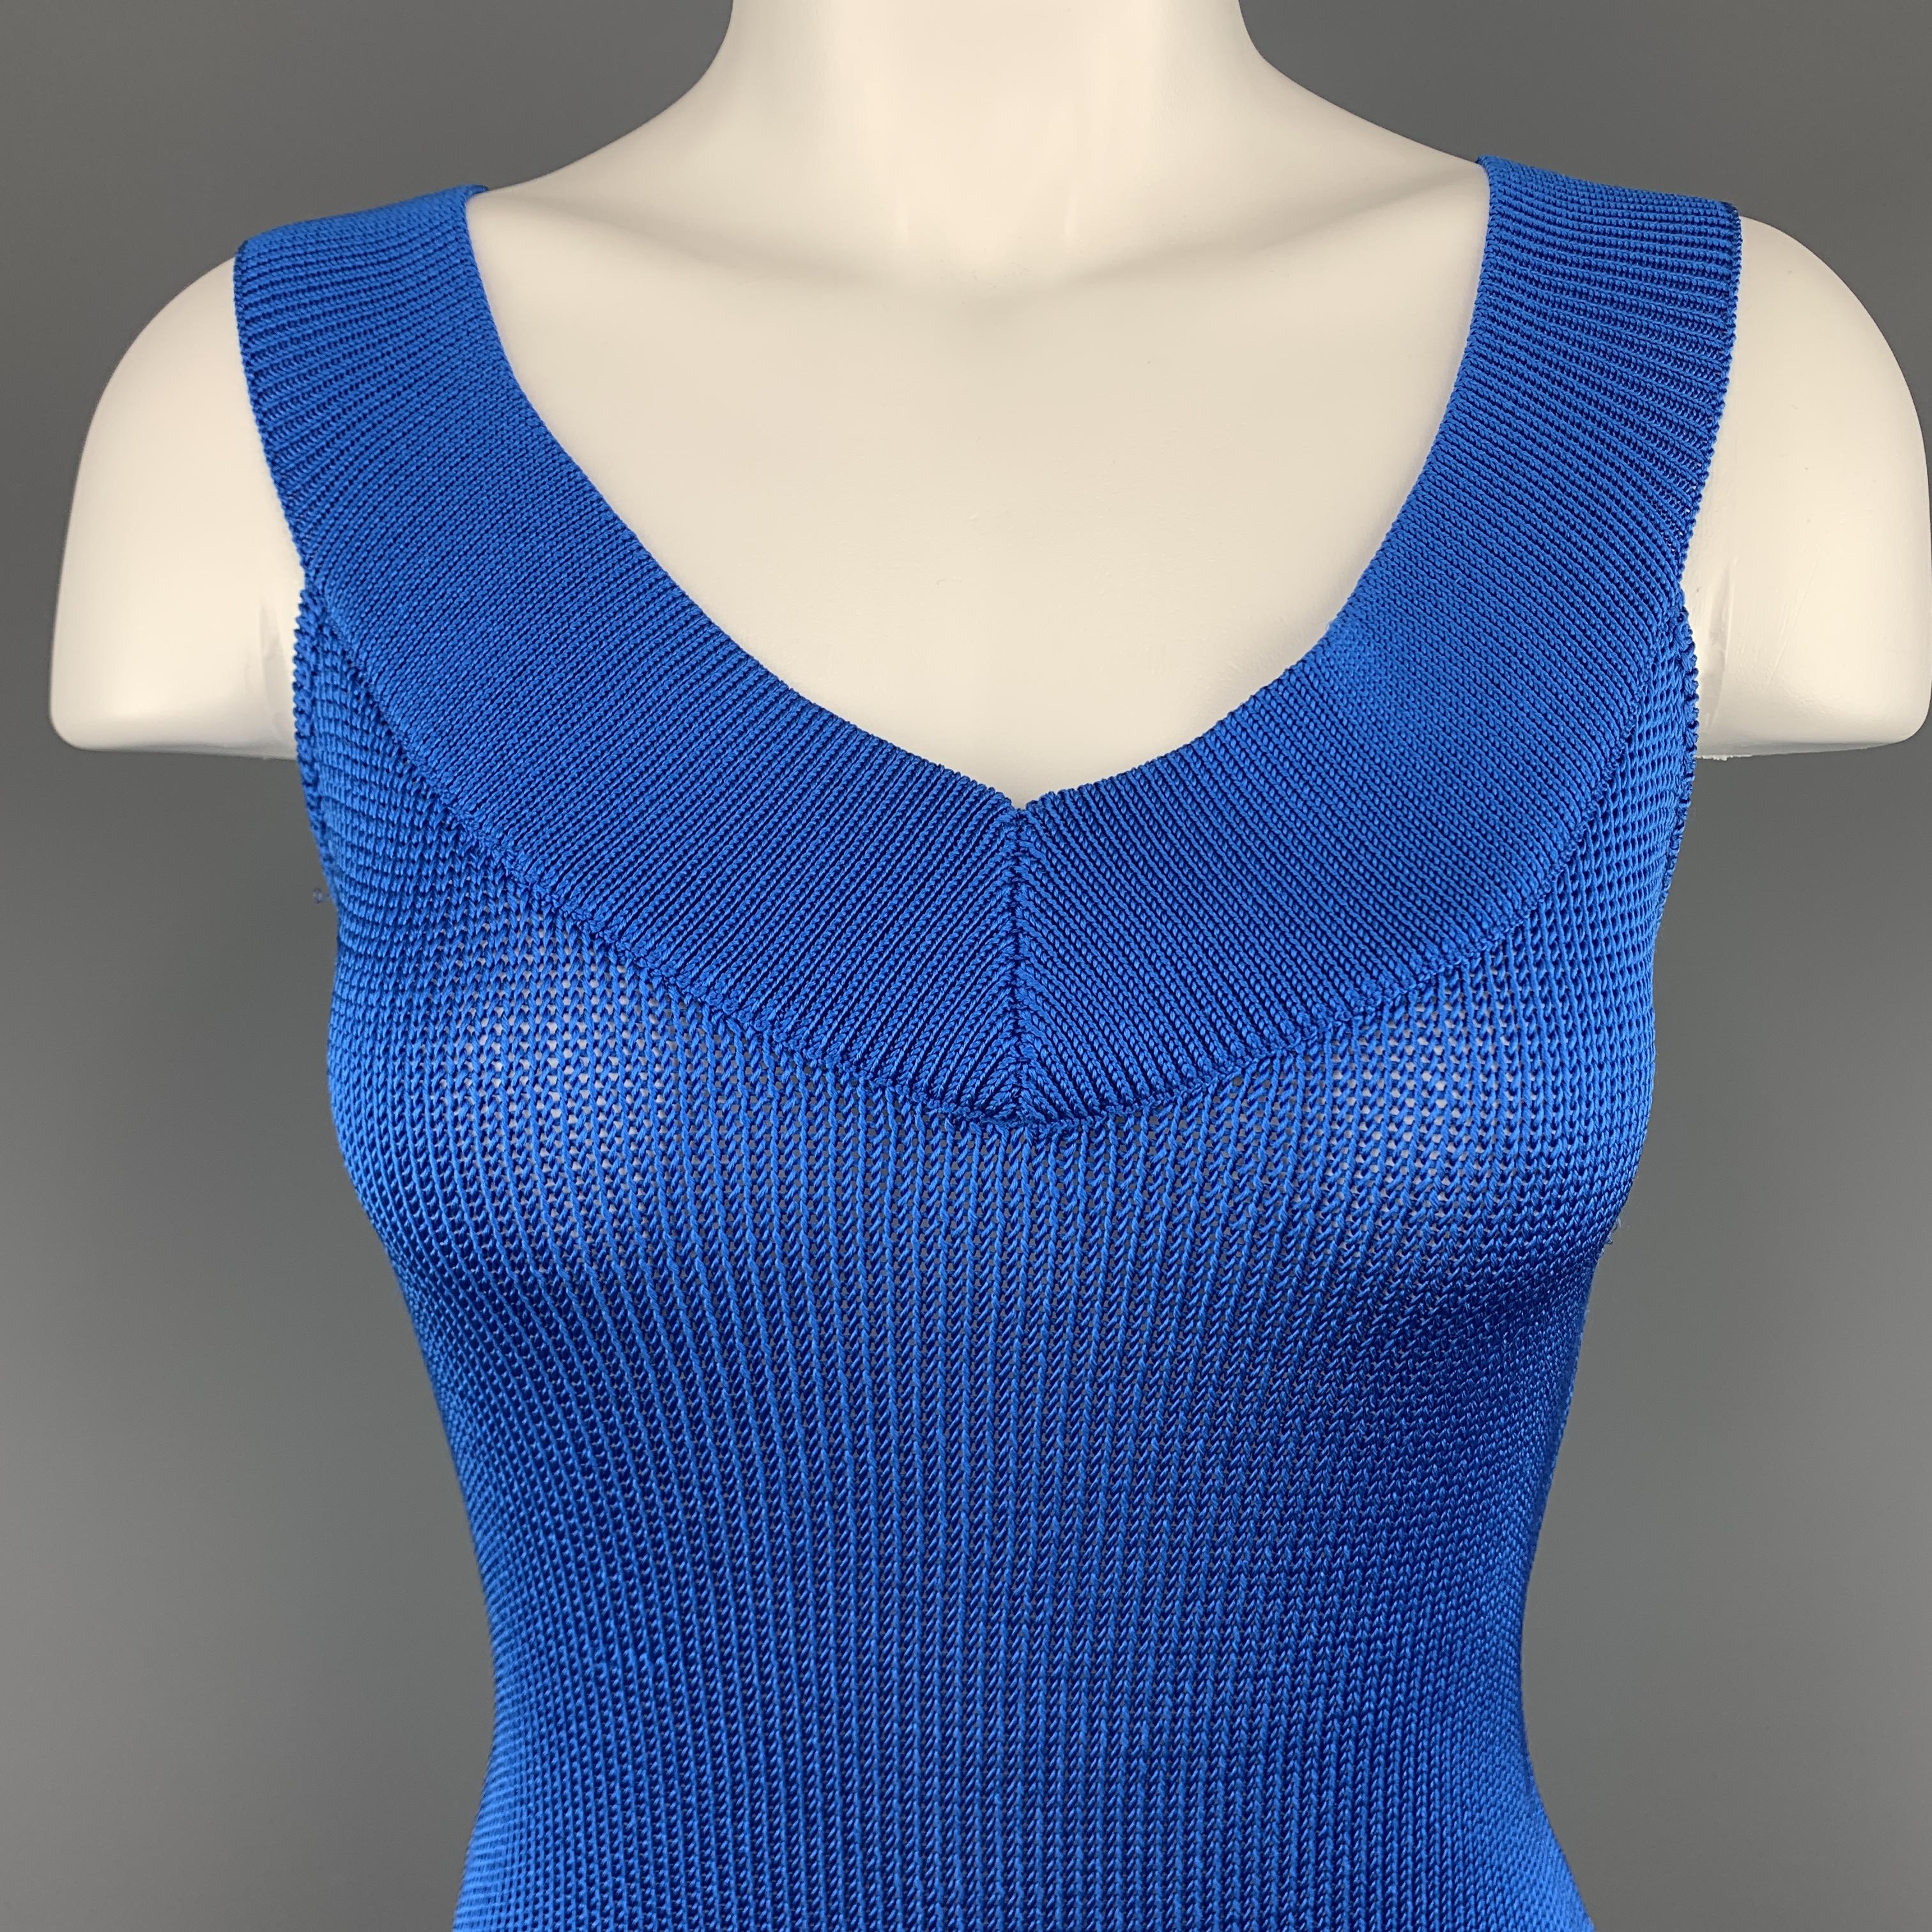 RALPH LAUREN BLACK LABEL top comes in royal blue silk knit with a thick V neck line.
 
Excellent Pre-Owned Condition.
Marked: S
 
Measurements:
 
Shoulder: 14 in.
Bust: 34 in.
Length: 24 in.